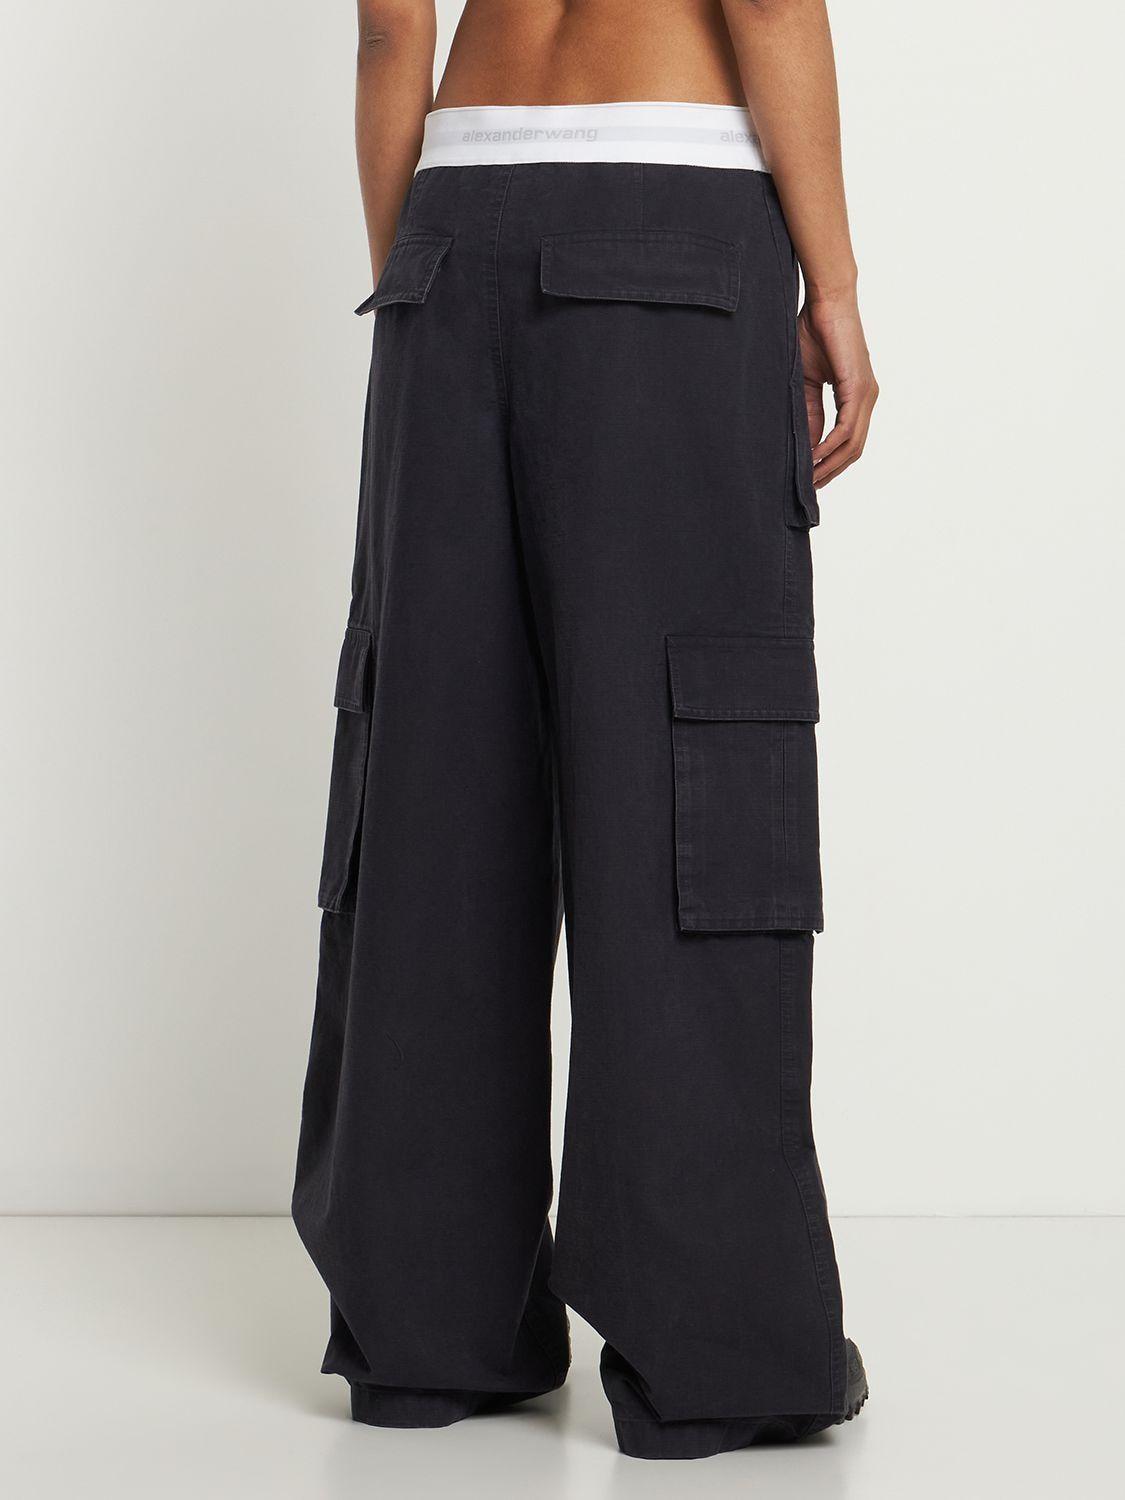 Alexander Wang Rave Cotton Cargo Pants in Blue